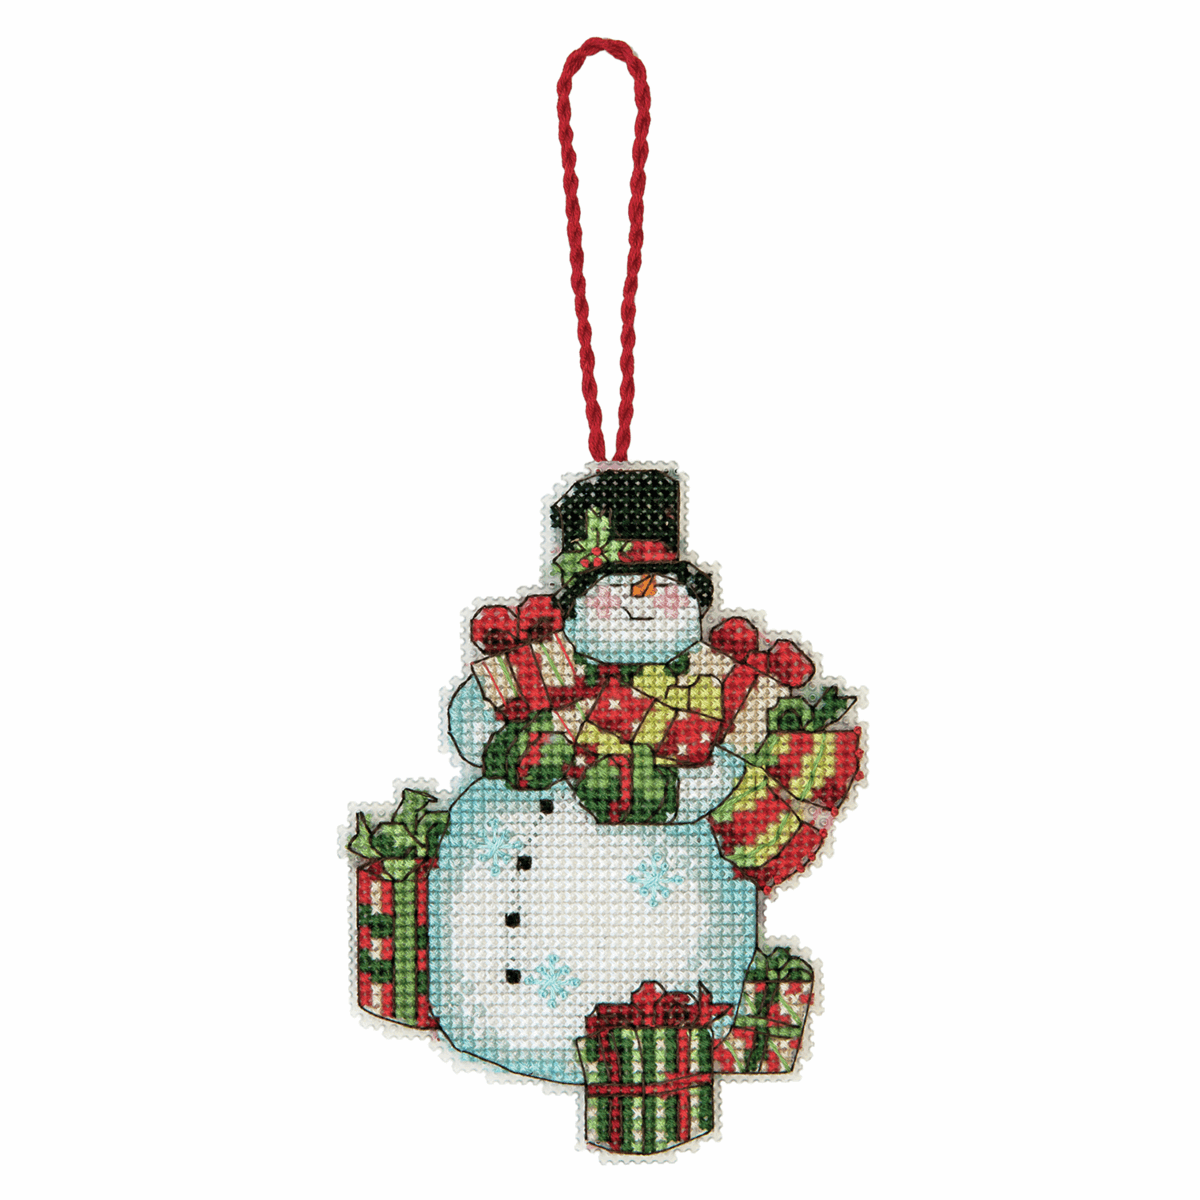 Counted Cross Stitch Ornament Kit - Snowman